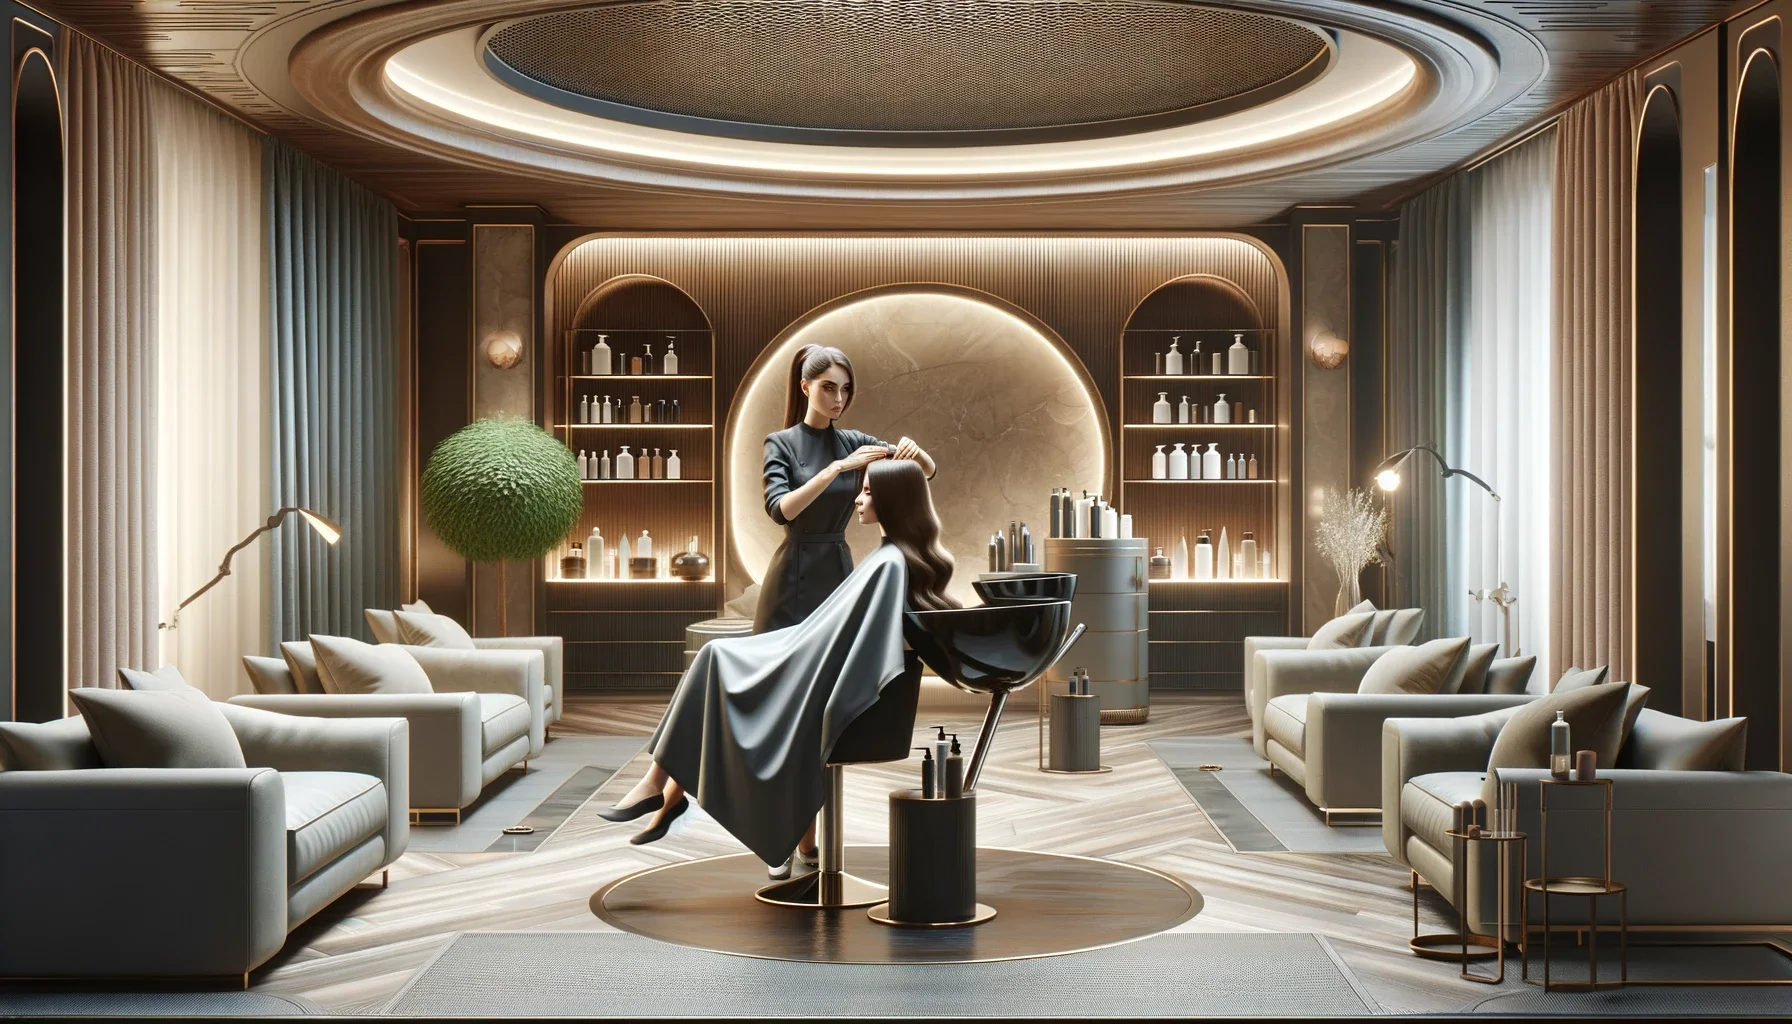 An elegant, modern image showing a professional hair salon environment. The salon is upscale and stylish, featuring sleek furniture